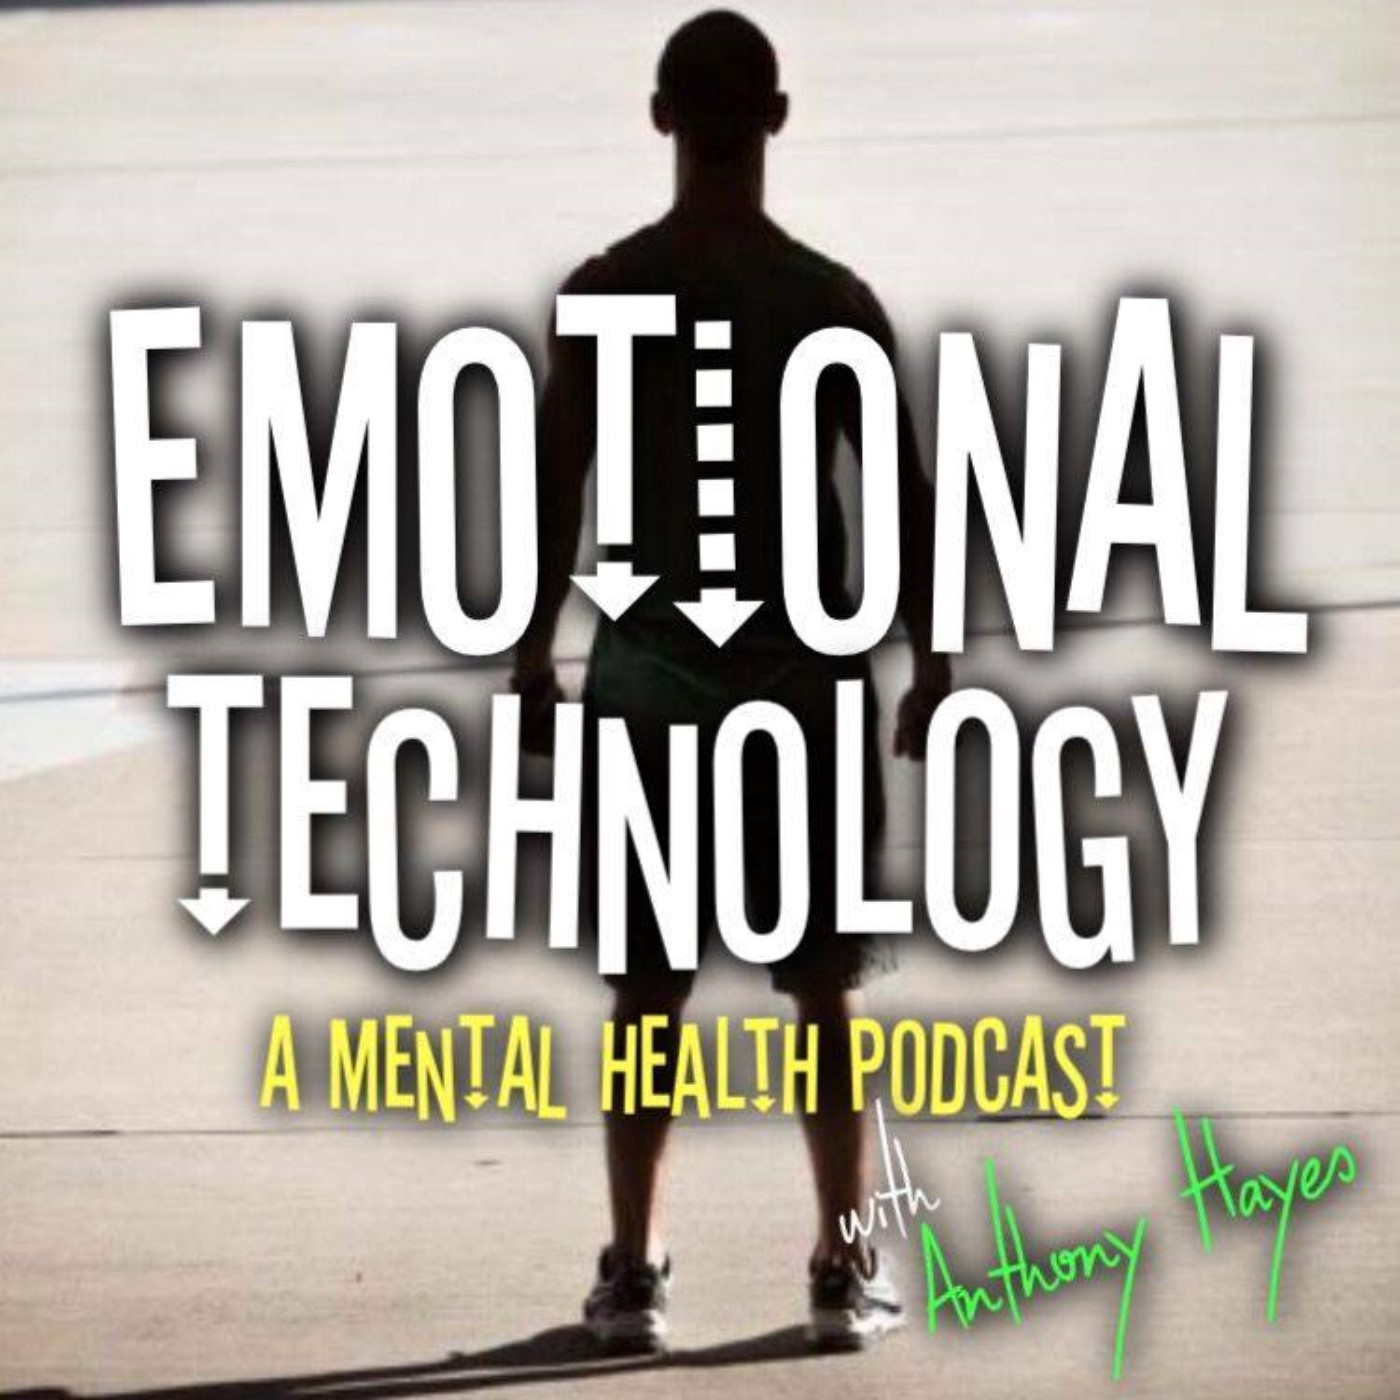 Emotional Technology - A Mental Health Podcast